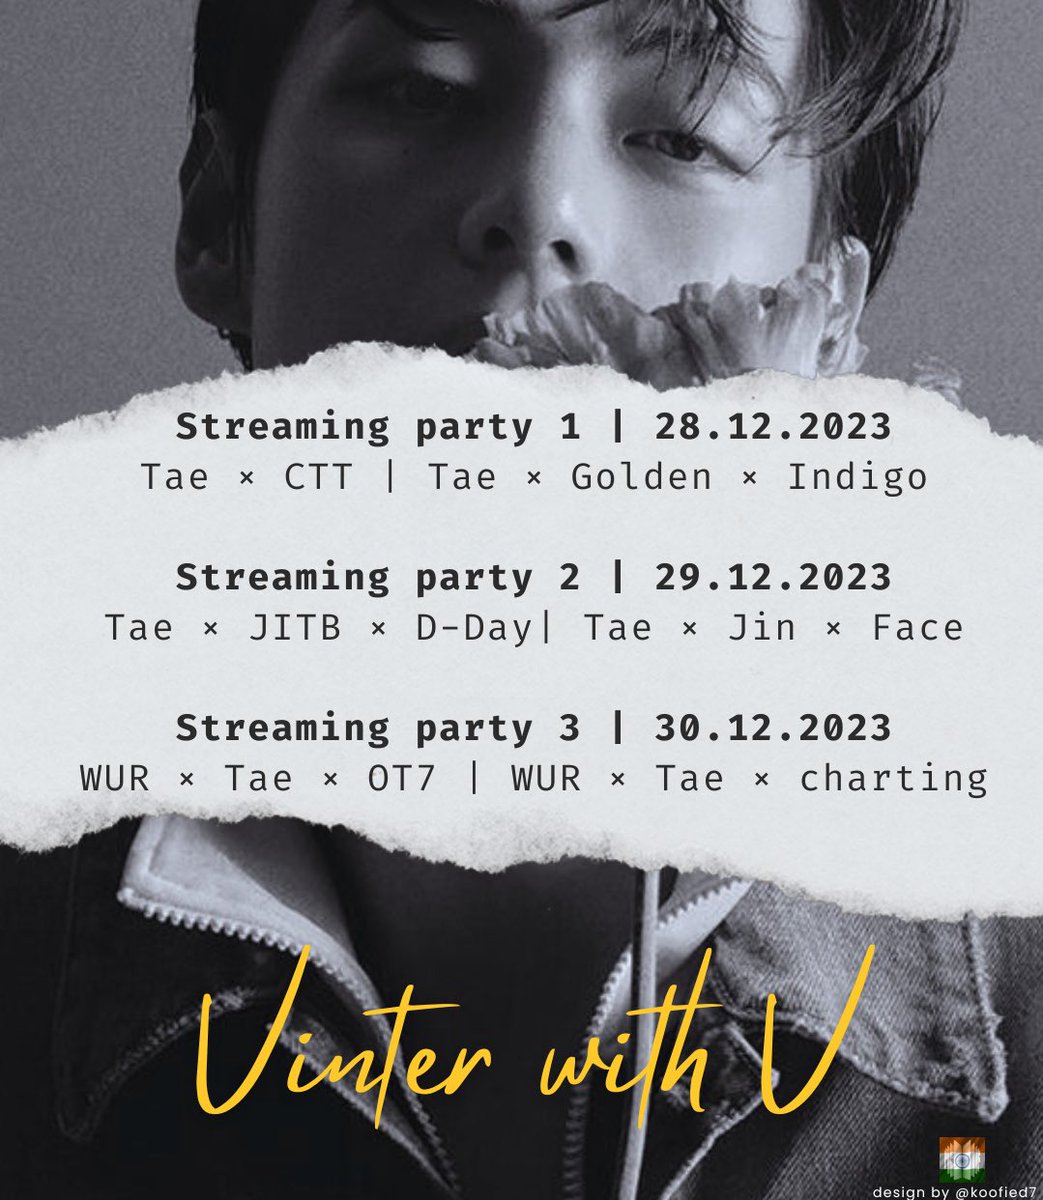 DAY - 2 :
Join Us to celebrate Taehyung’s birthday, Let's stream and celebrate together! 🥳🎶

 RT and REPLY 
#VinterWithV 
#TaehyungBirthday
#VantaeStreamingParty2

Spotify :open.spotify.com/user/31uloclav…

Stationhead :share.stationhead.com/G2PjSRVPN61